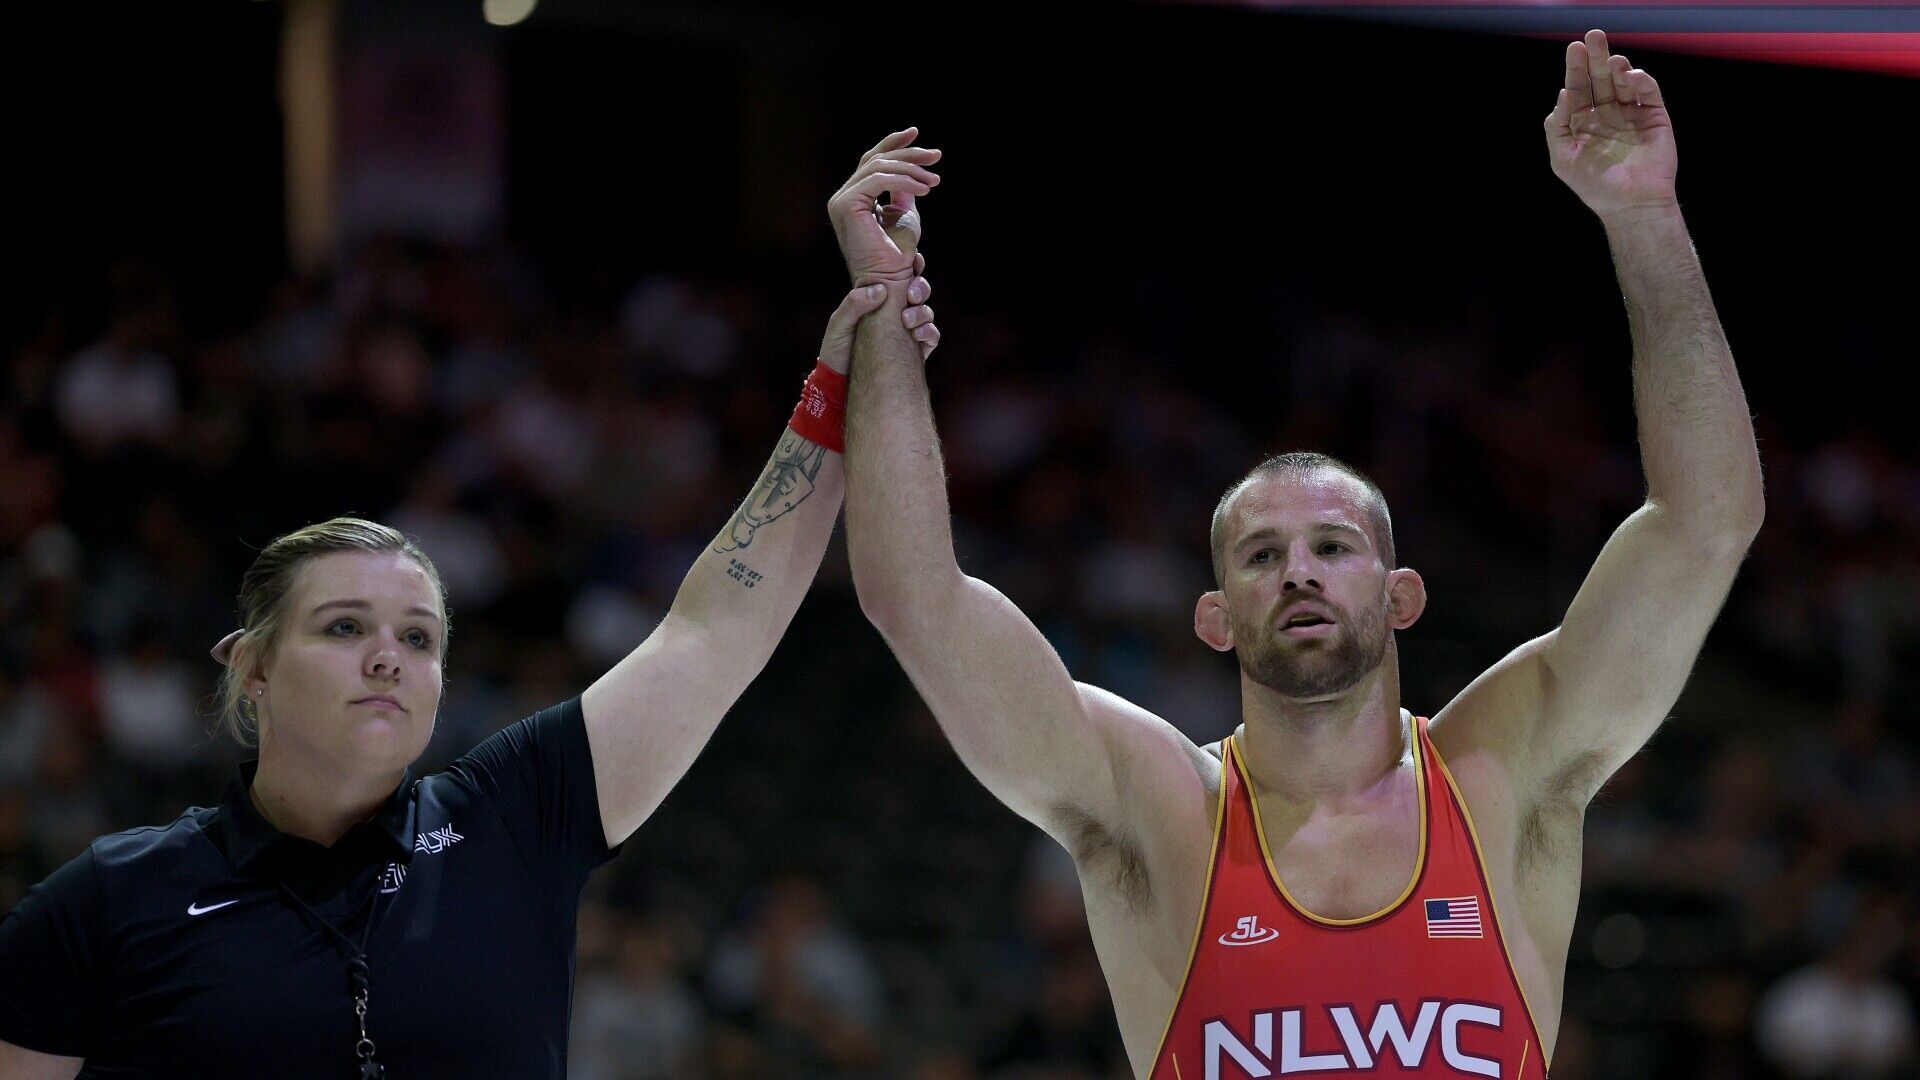 David Taylor wins third title as Americans take three golds to open wrestling worlds Olympics actionnewsnow